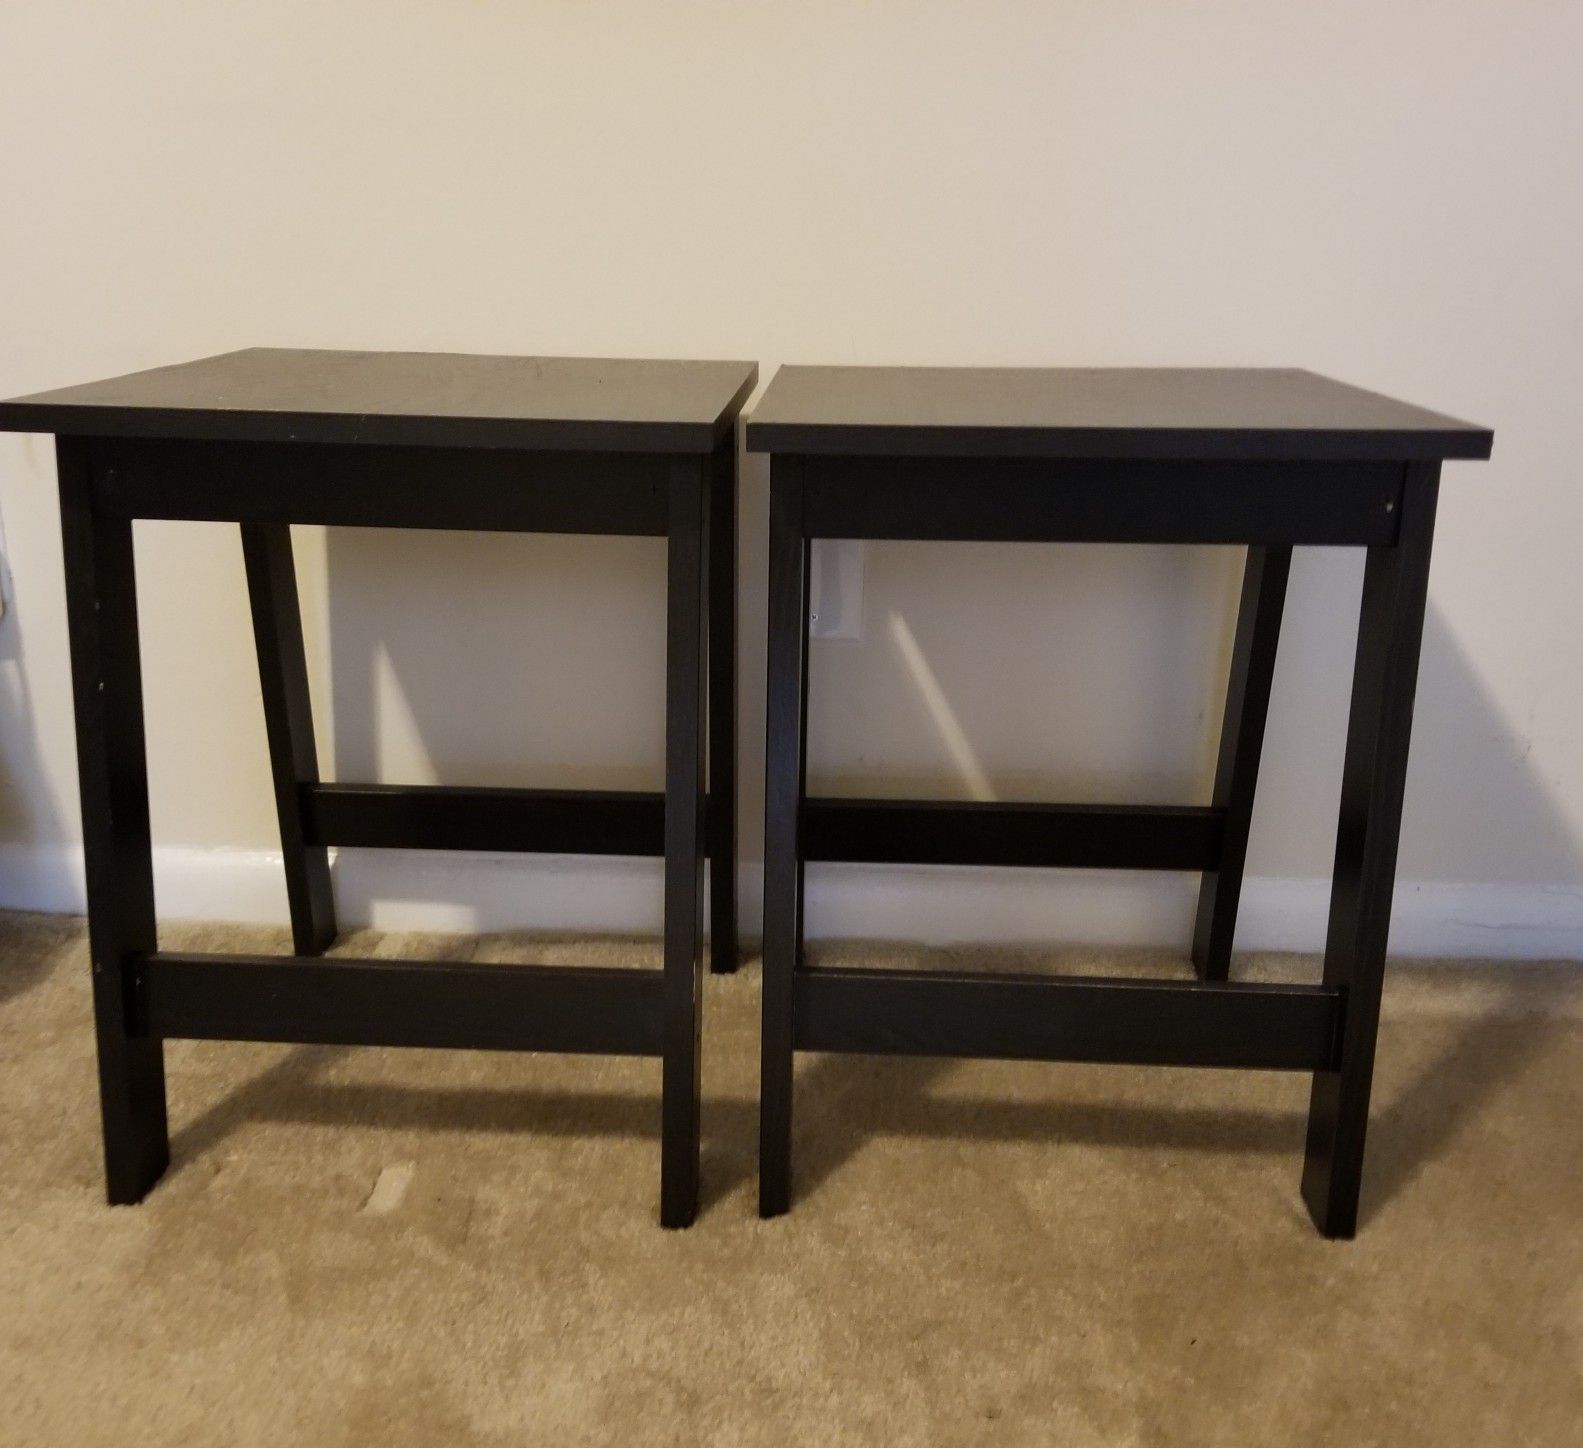 2 Small side tables 4 sell